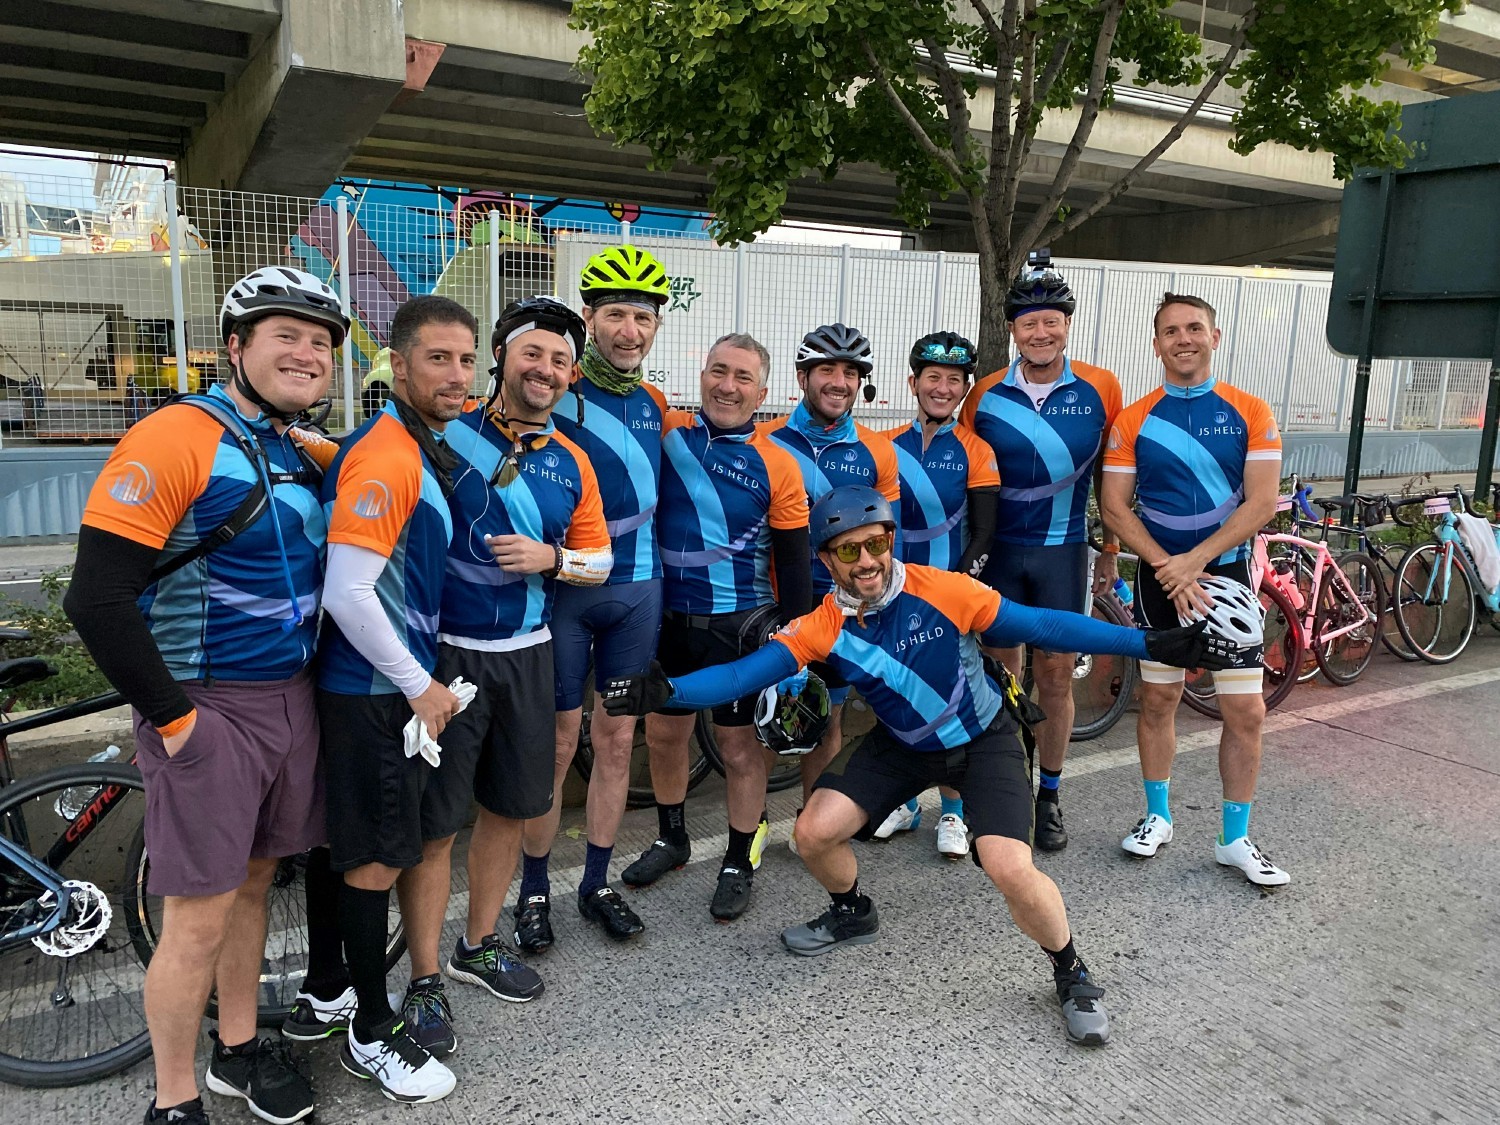 J.S. Held participated in Bike MS, a fundraising ride to help change the world for those affected by Multiple Sclerosis